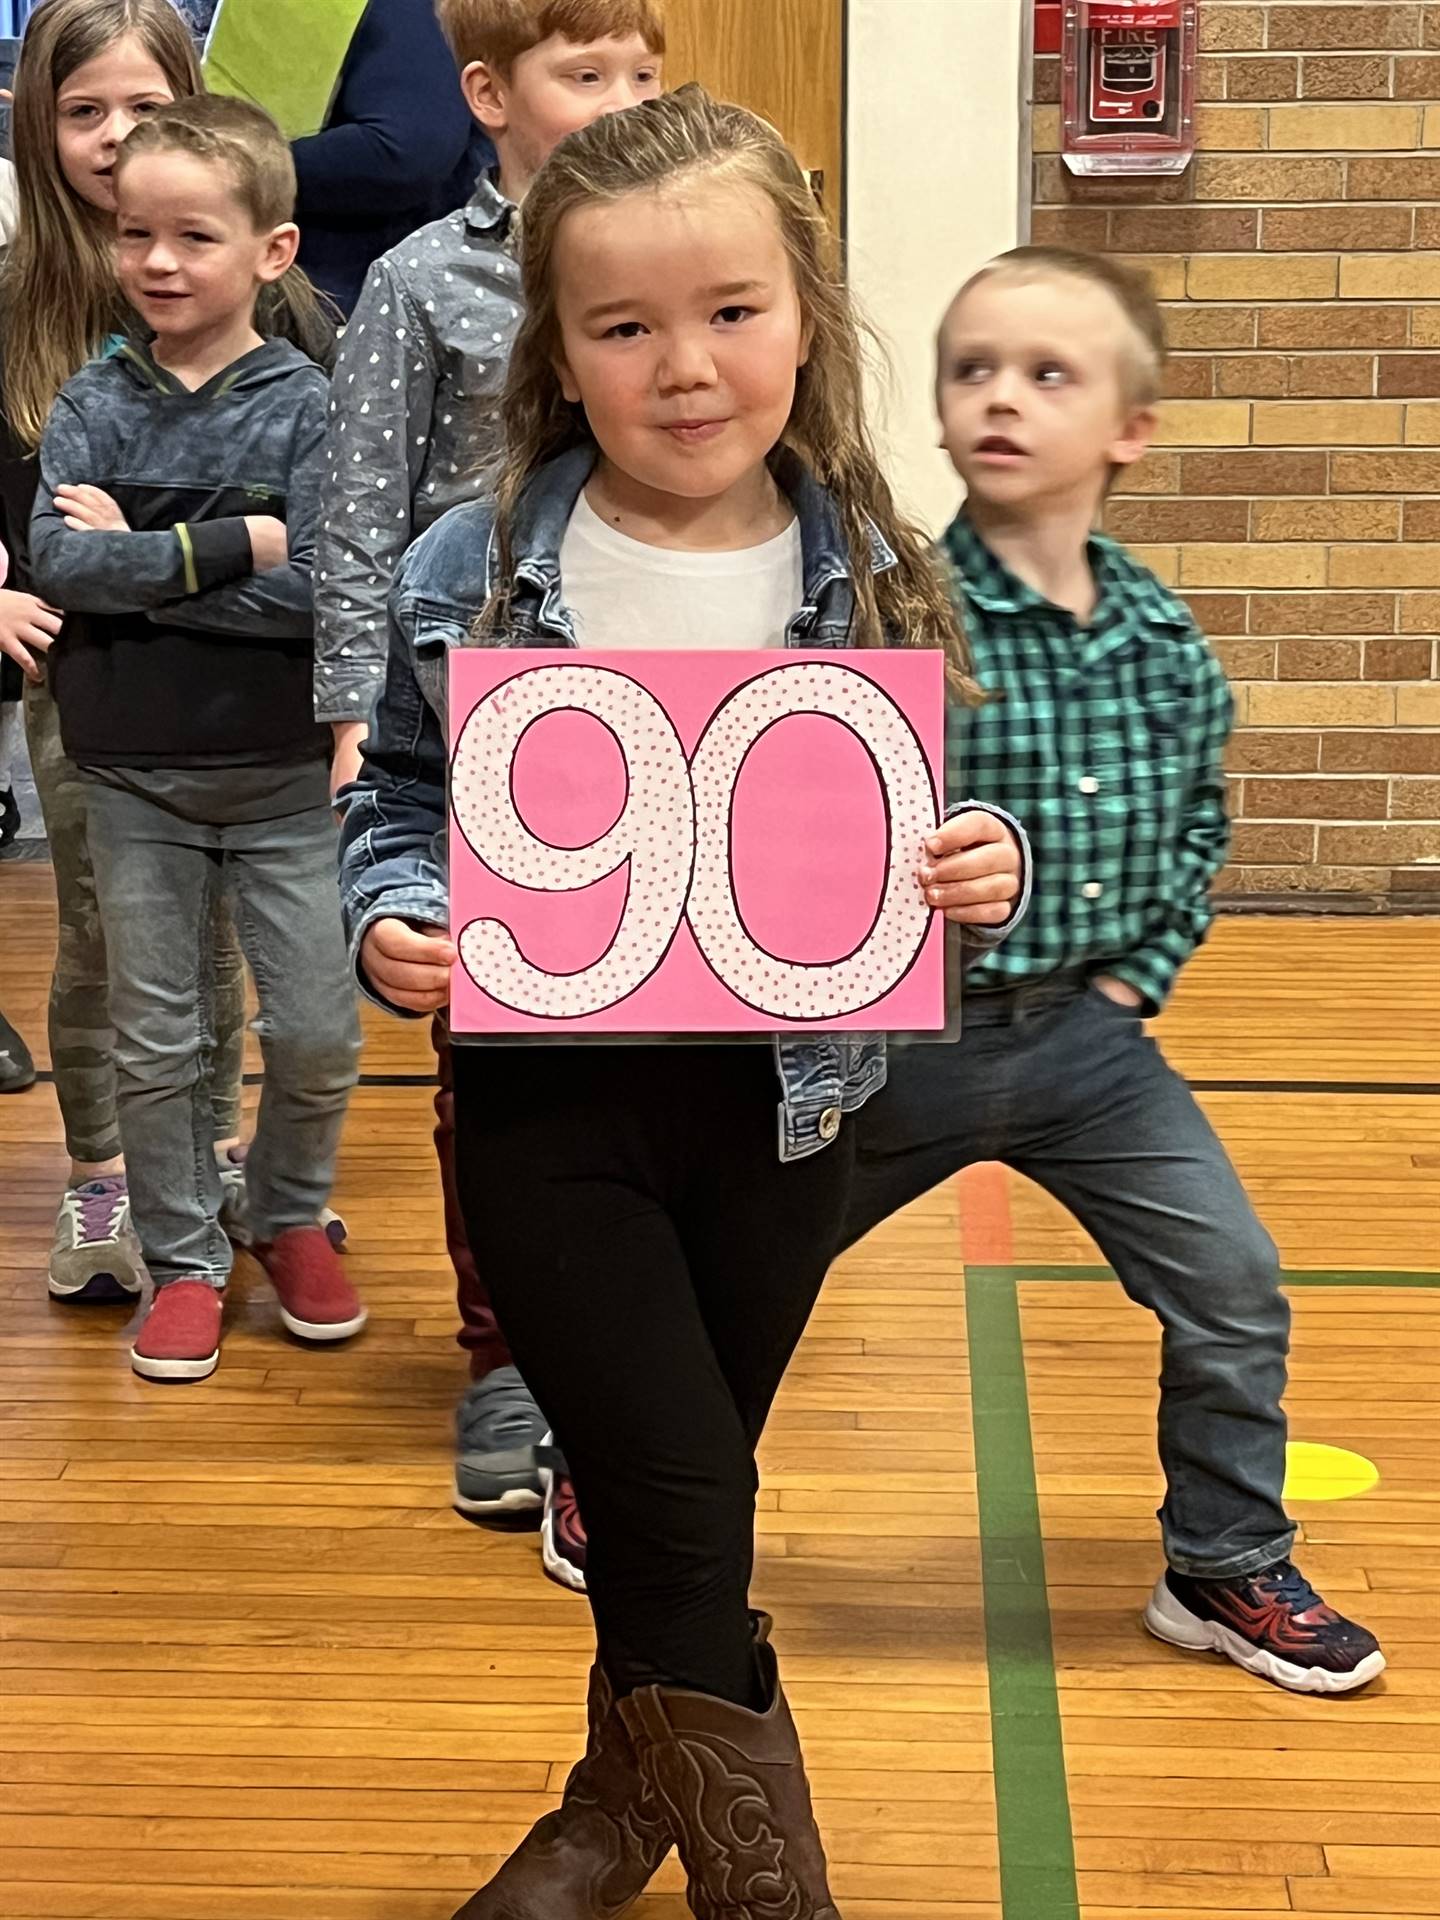 a student holds a 90 sign as adults look on